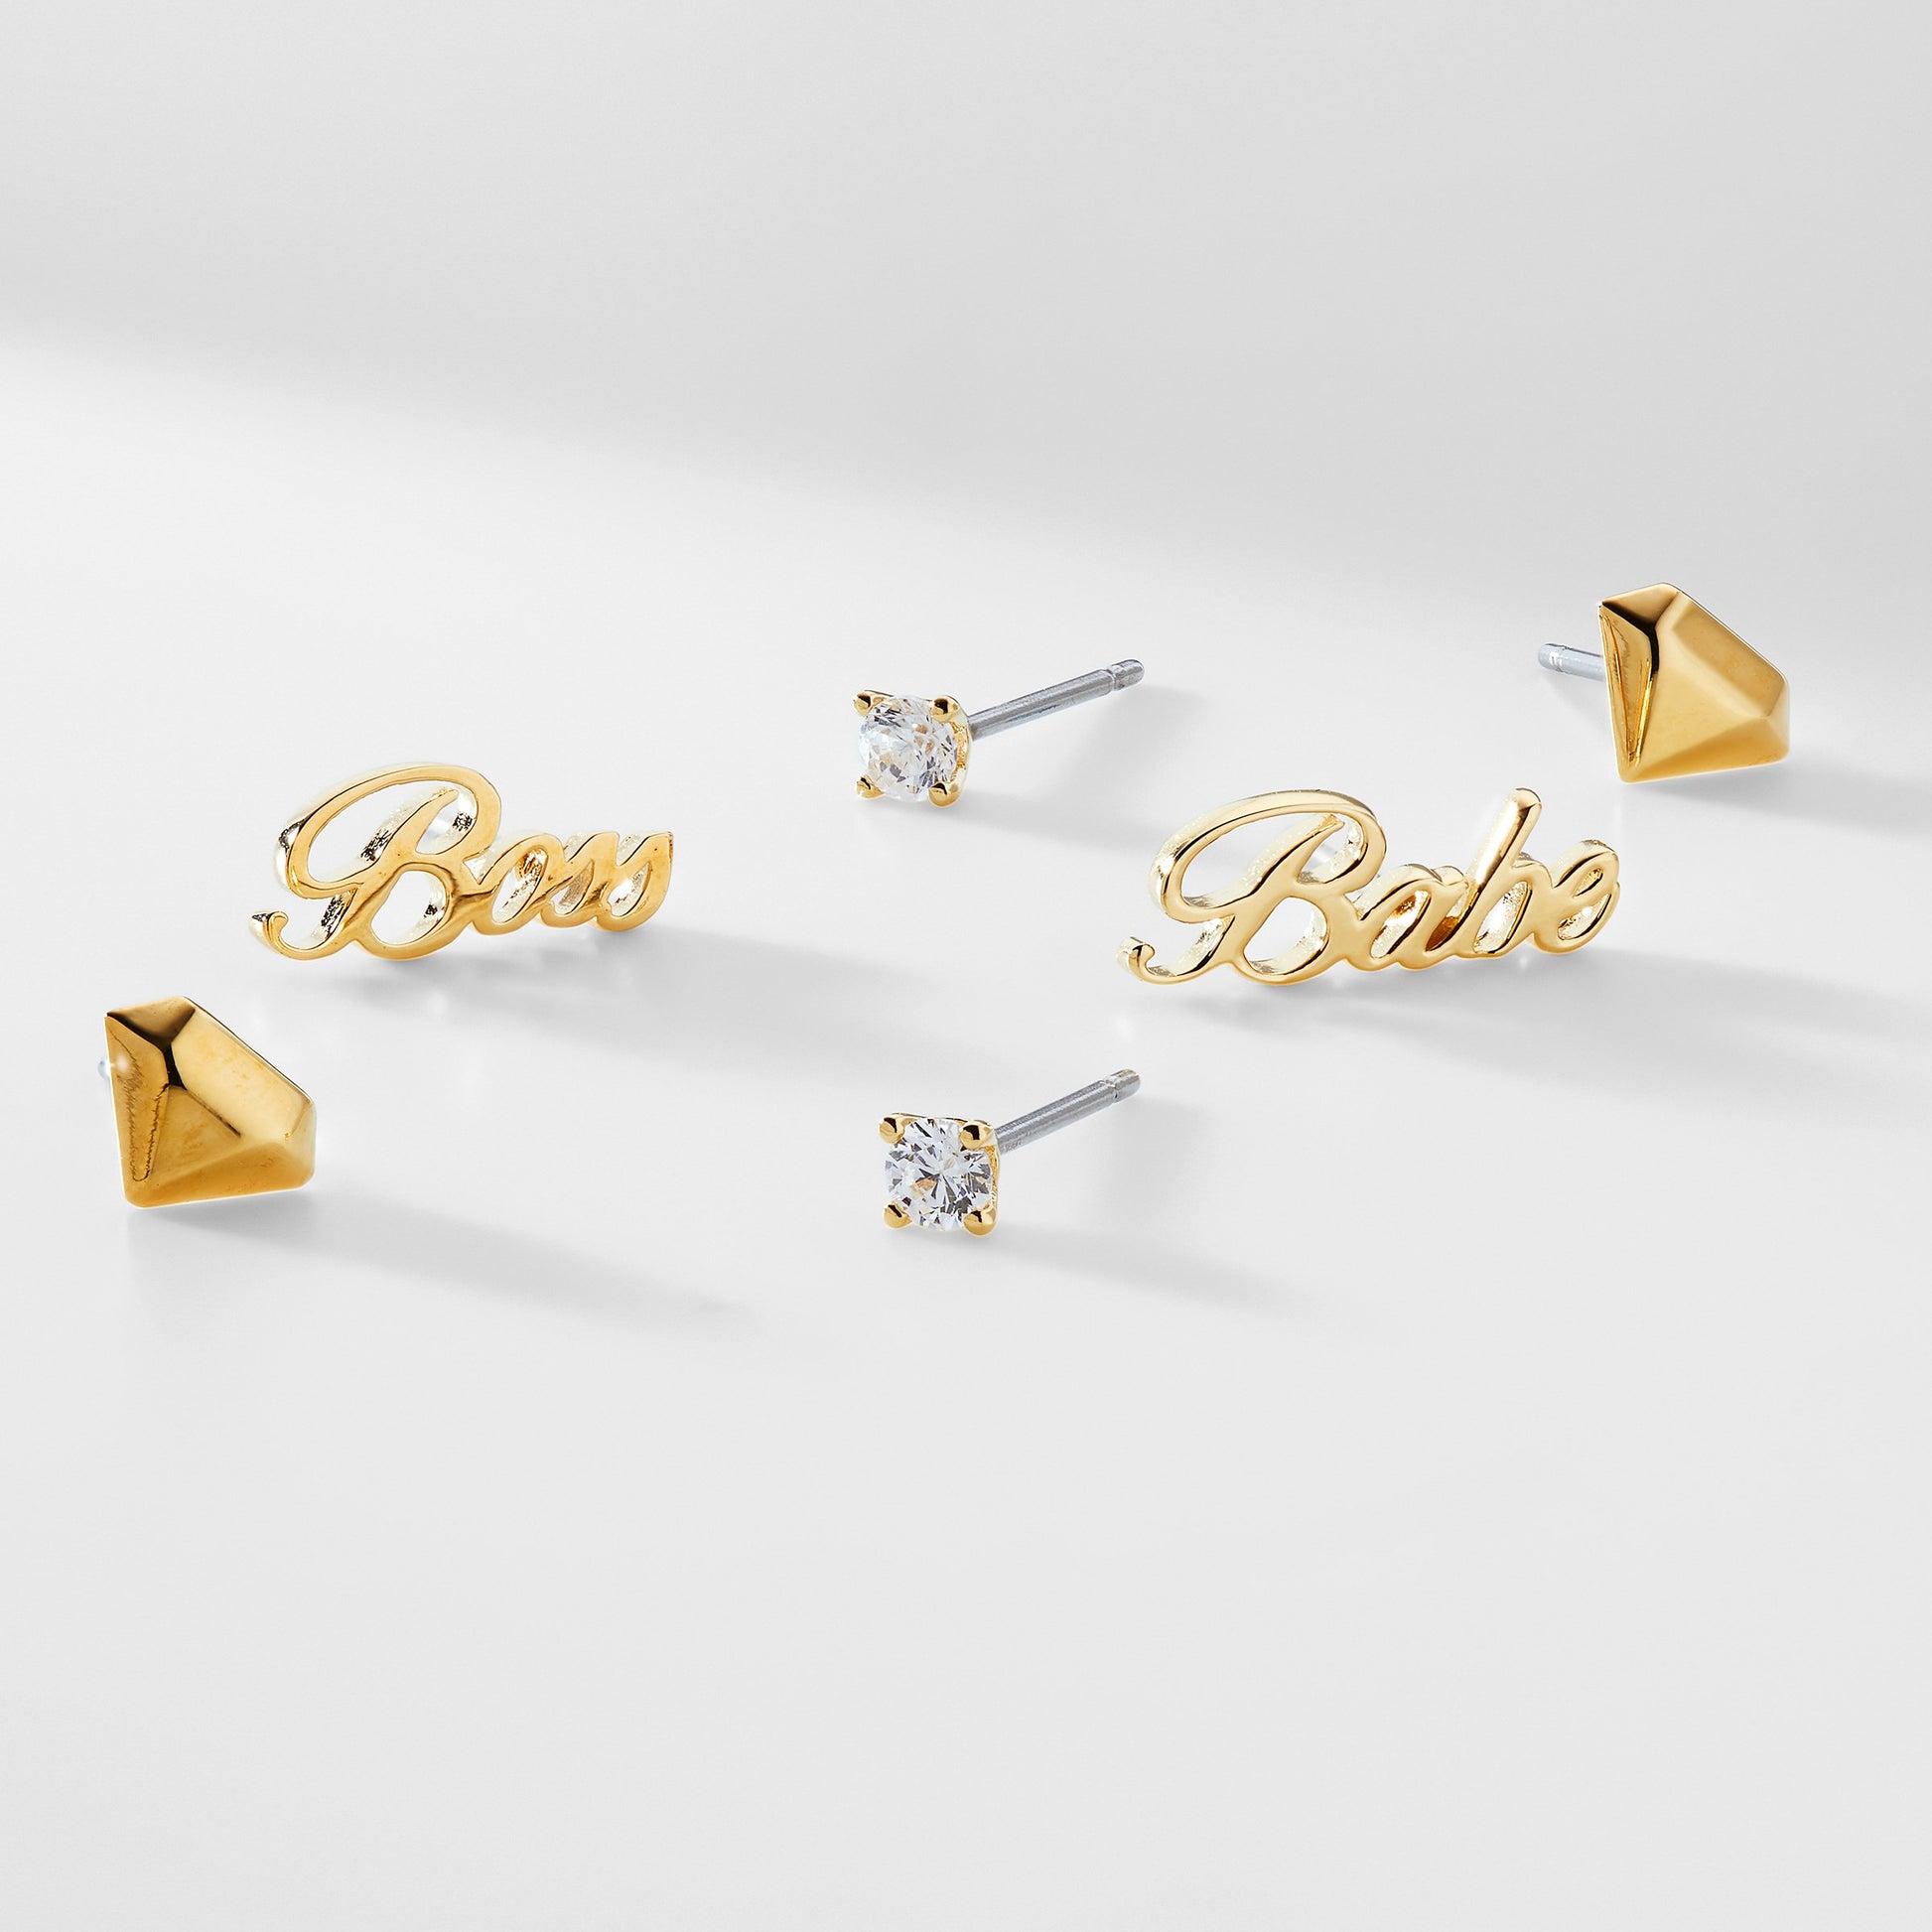 """""""""""""""""""""""""""""""""""""""""""""""""""""""""""""""Gold diamond shape stud earrings, cubic zirconia studs, and studs that say """"""""""""""""""""""""""""""""""""""""""""""""""""""""""""""""Boss Babe"""""""""""""""""""""""""""""""""""""""""""""""""""""""""""""""""""""""""""""""""""""""""""""""""""""""""""""""""""""""""""""""